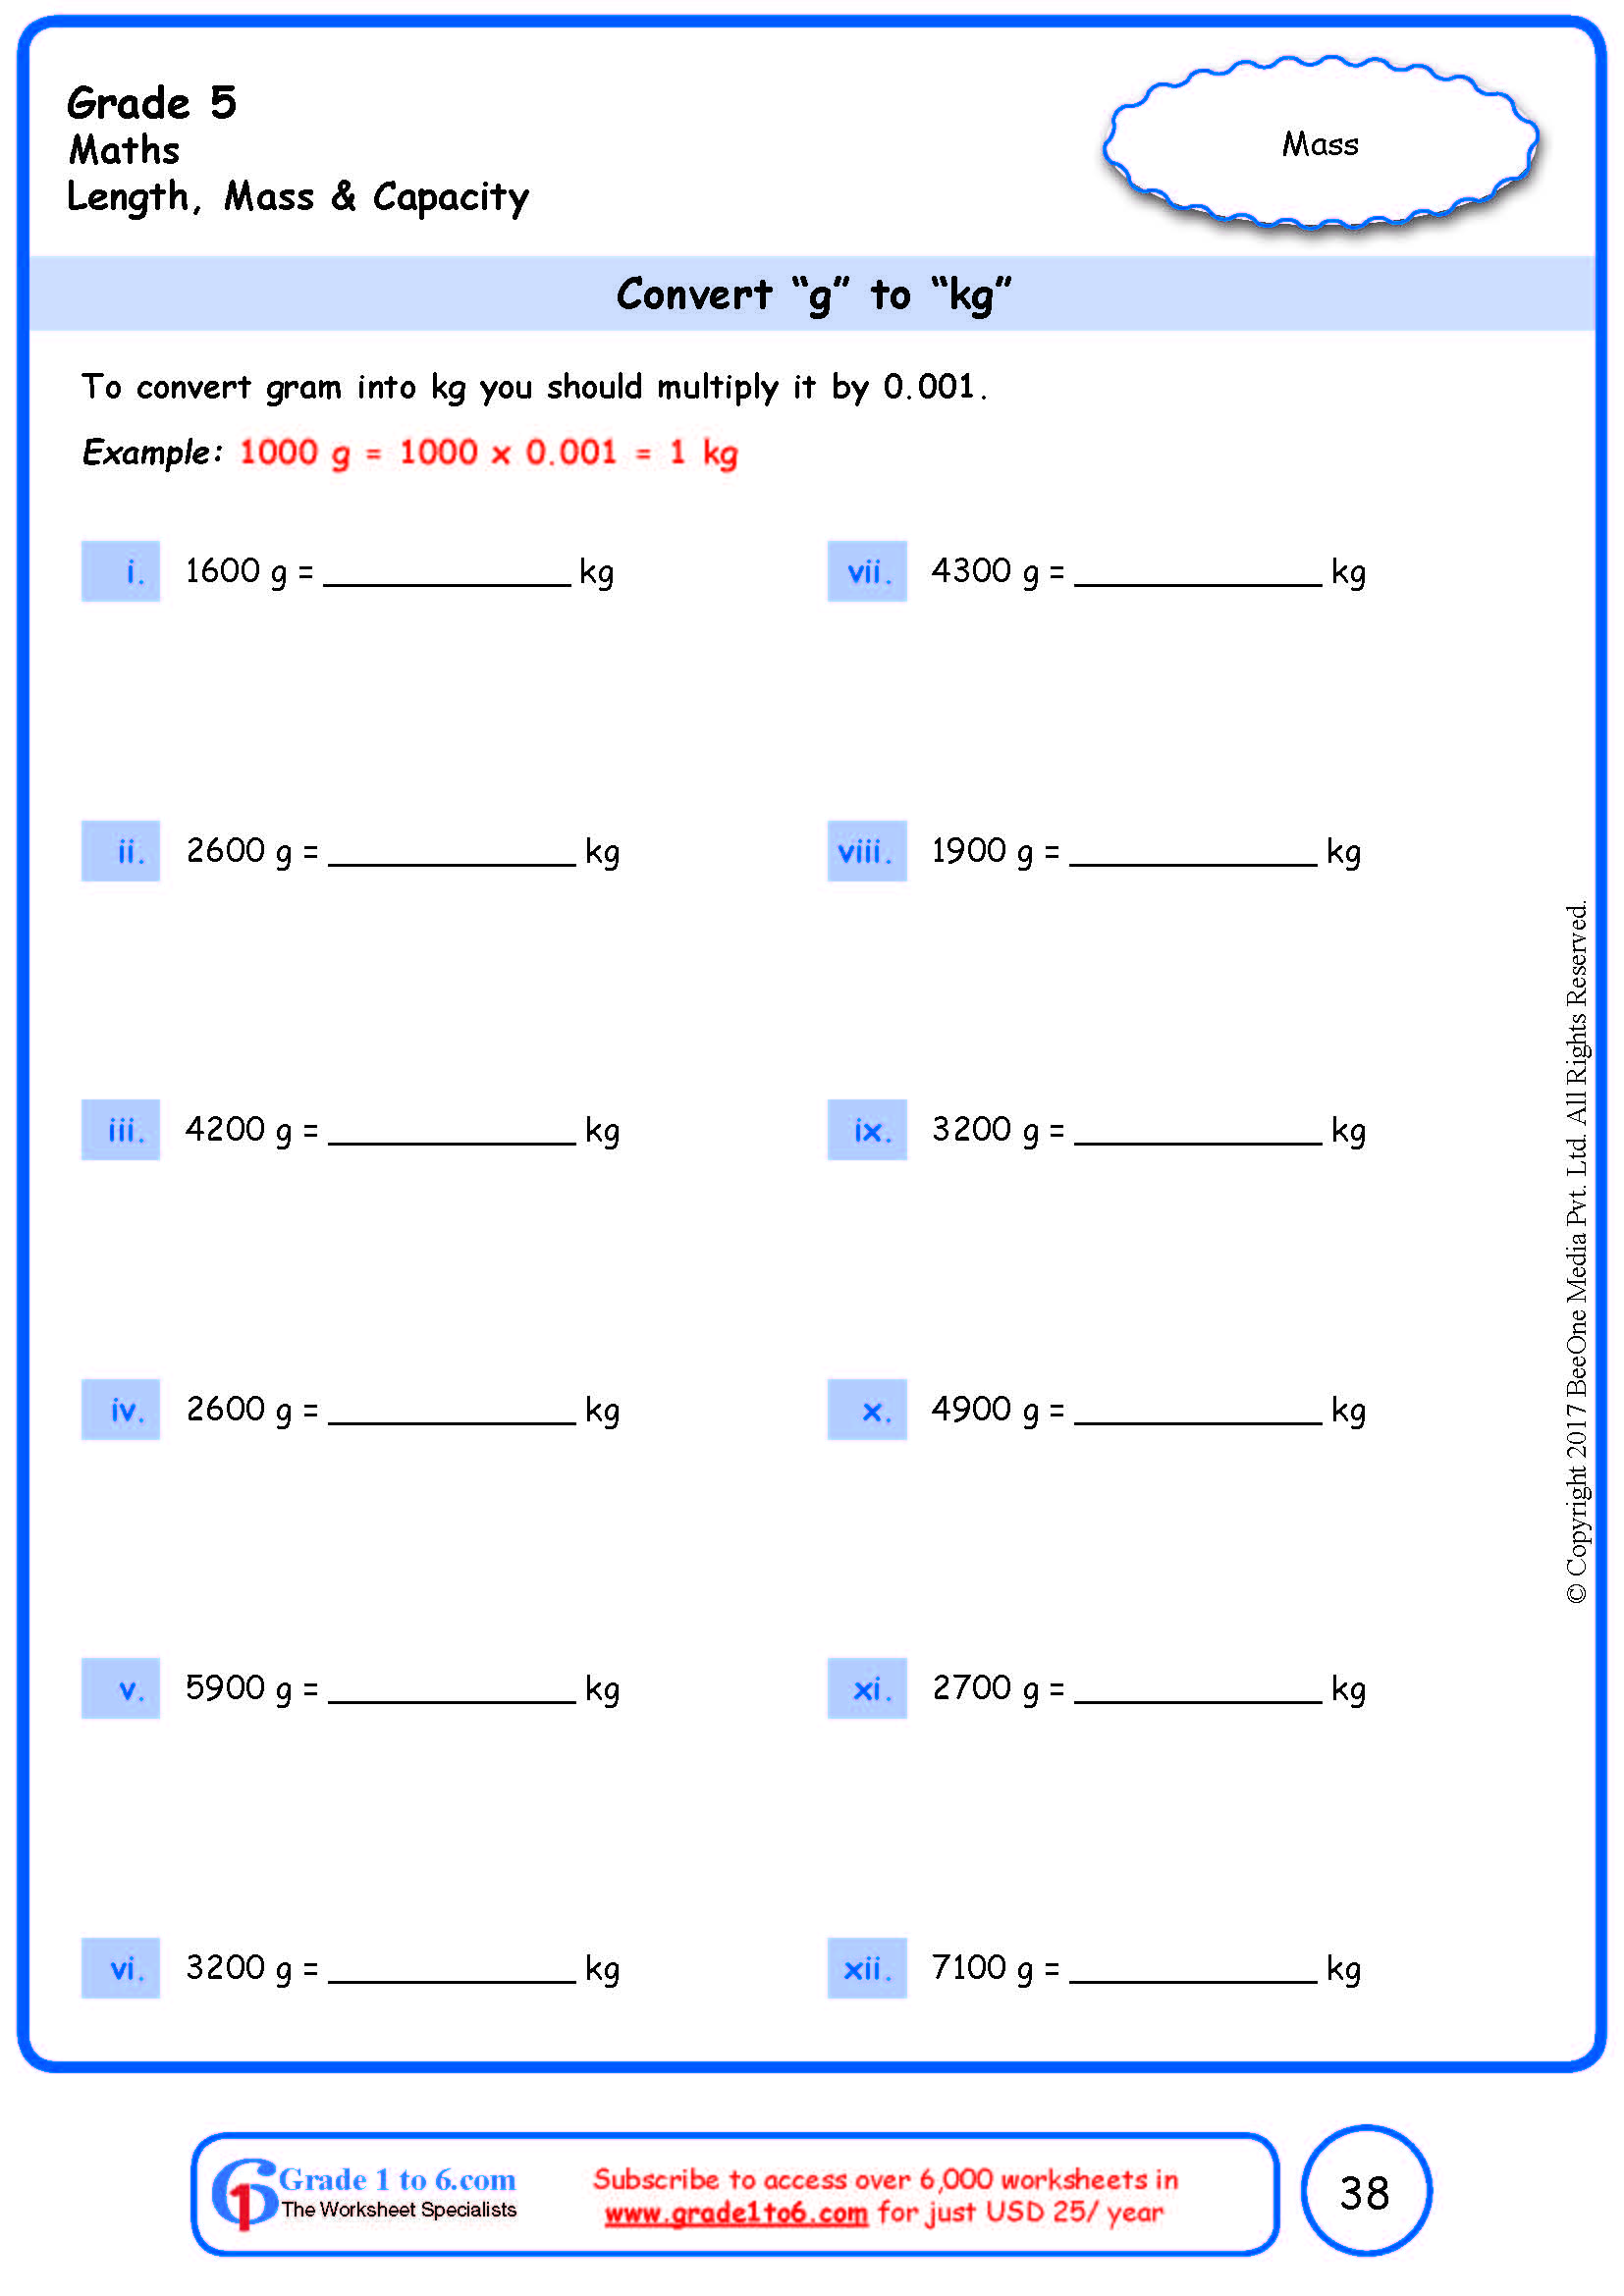 Grade 5 Conversion of gm to kg Worksheets|www.grade1to6.com